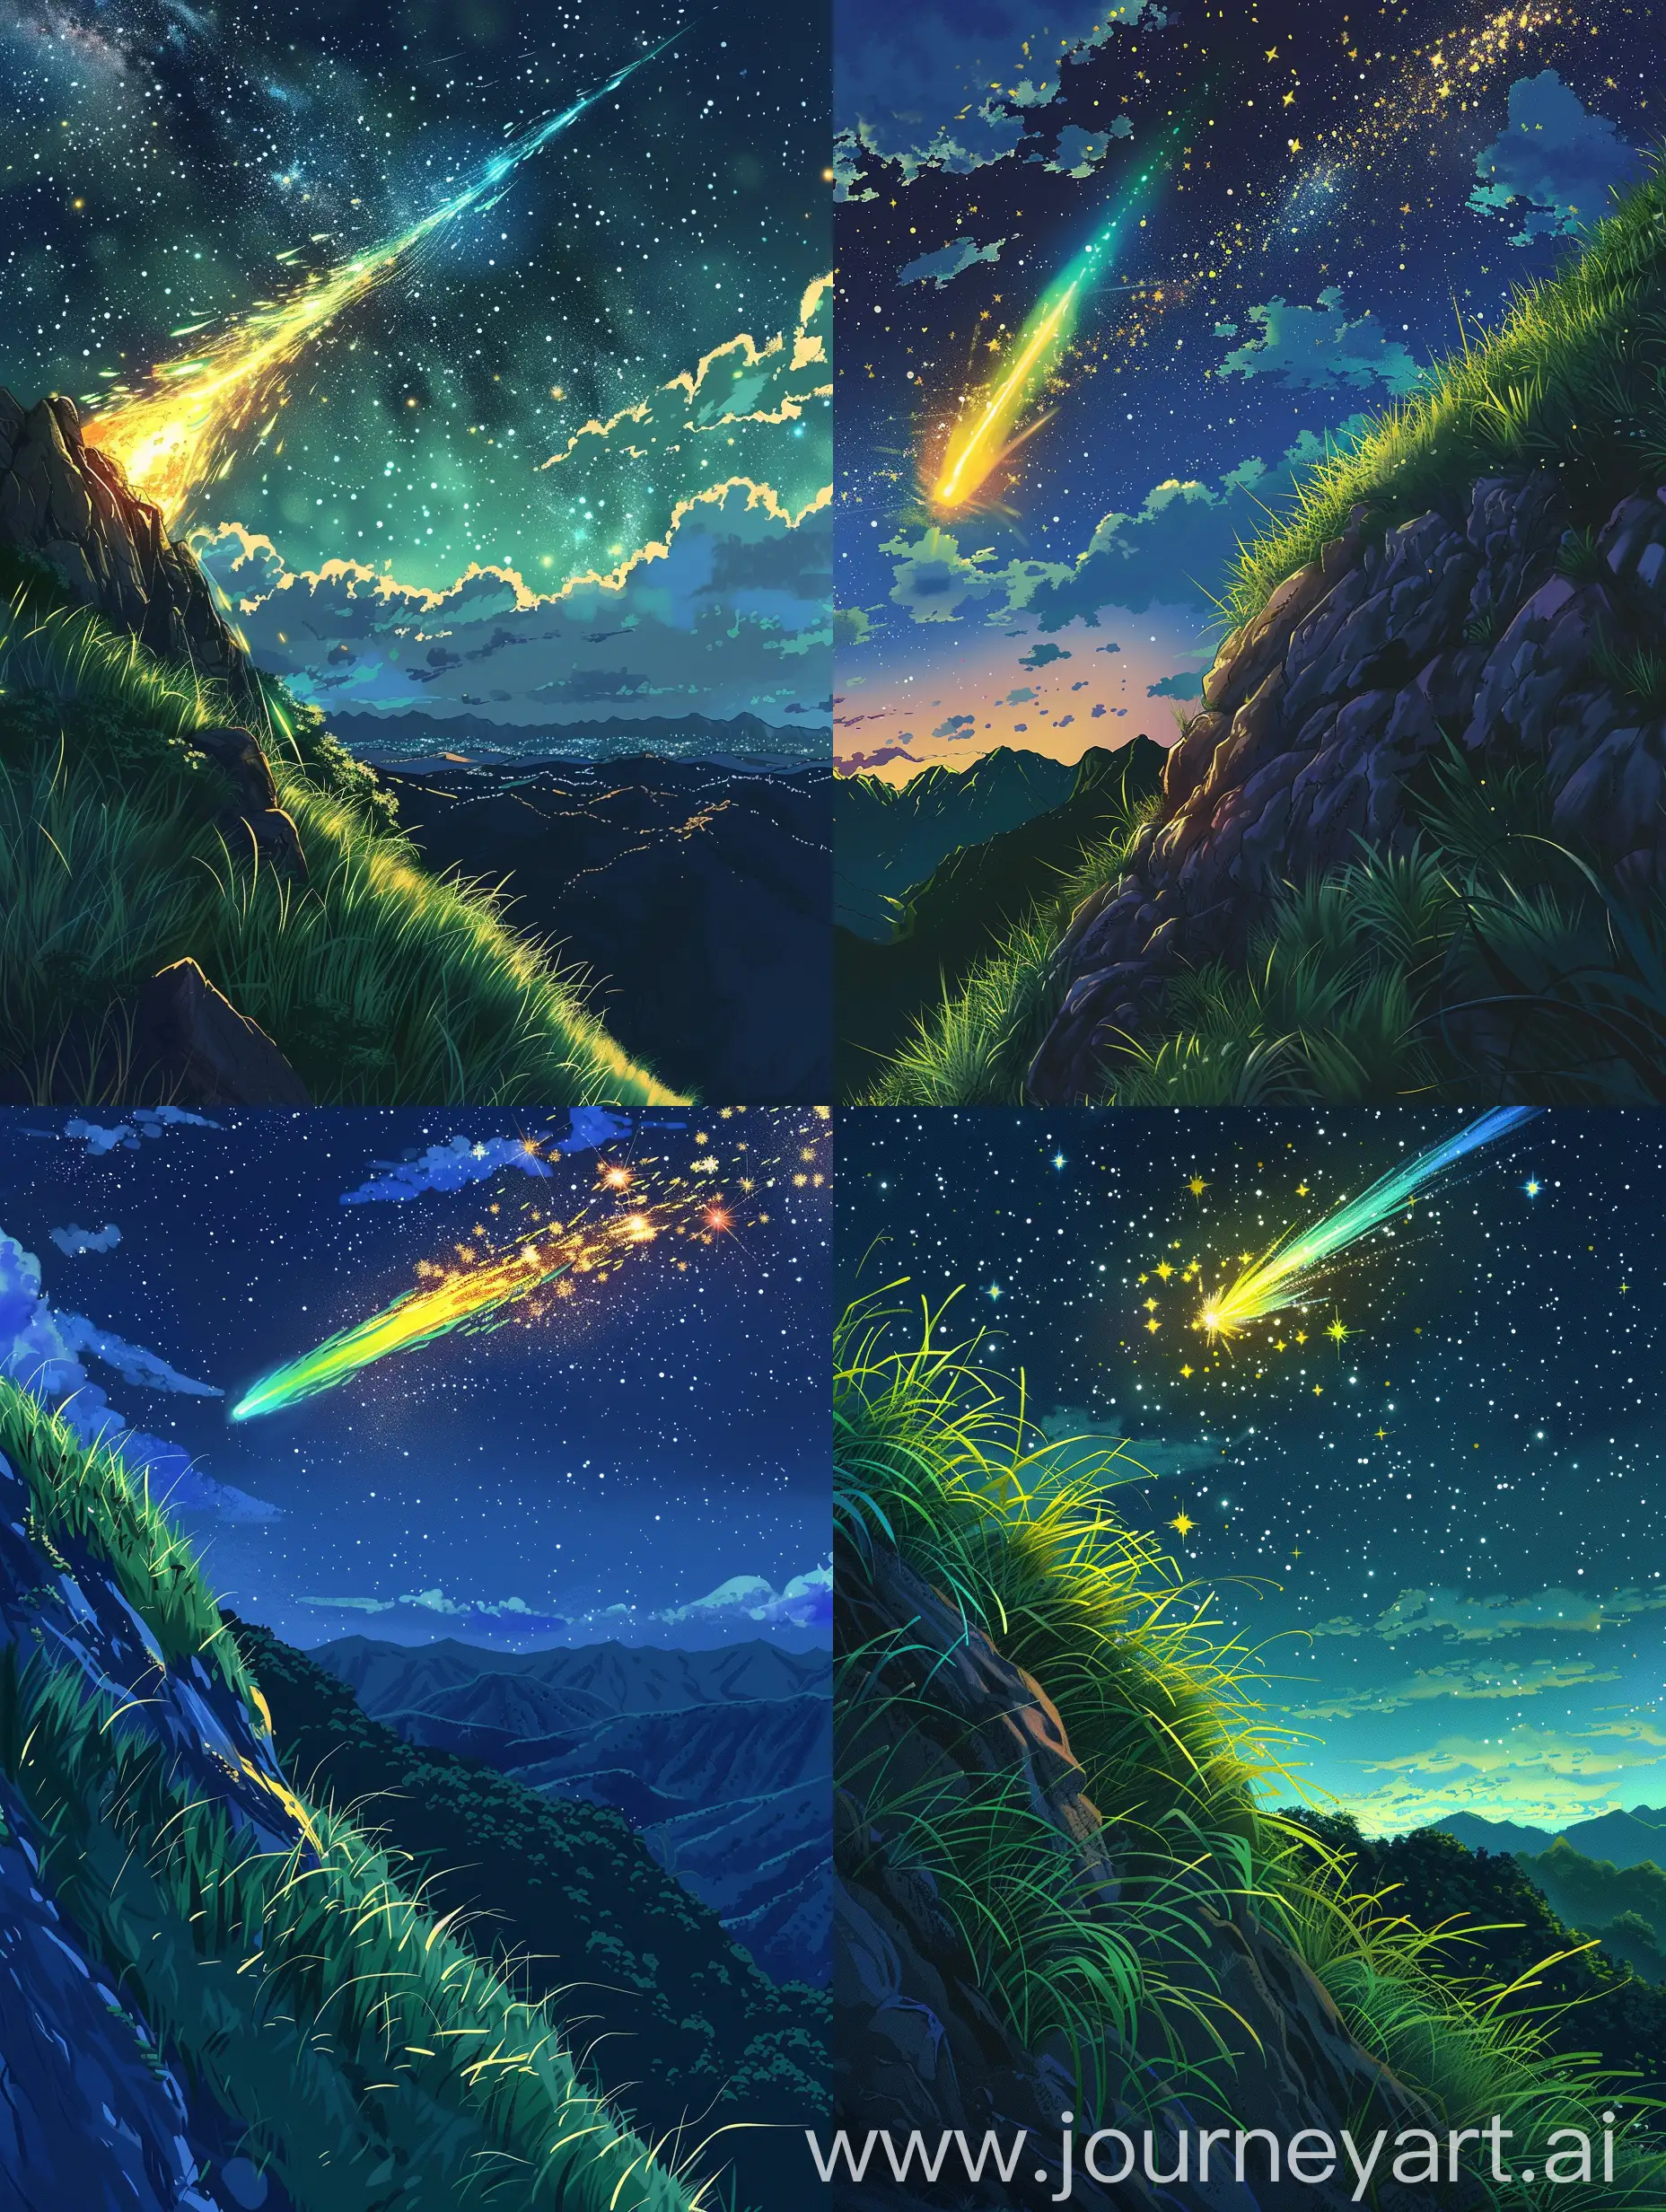 Anime style, from the mountain hill, a sky full of stars can be seen, where a yellow-blue-green meteor catches the light.  The grass on the mountain hill is radiant green due to the reflection of the moonlight, and the night sky is clear and full of stars.